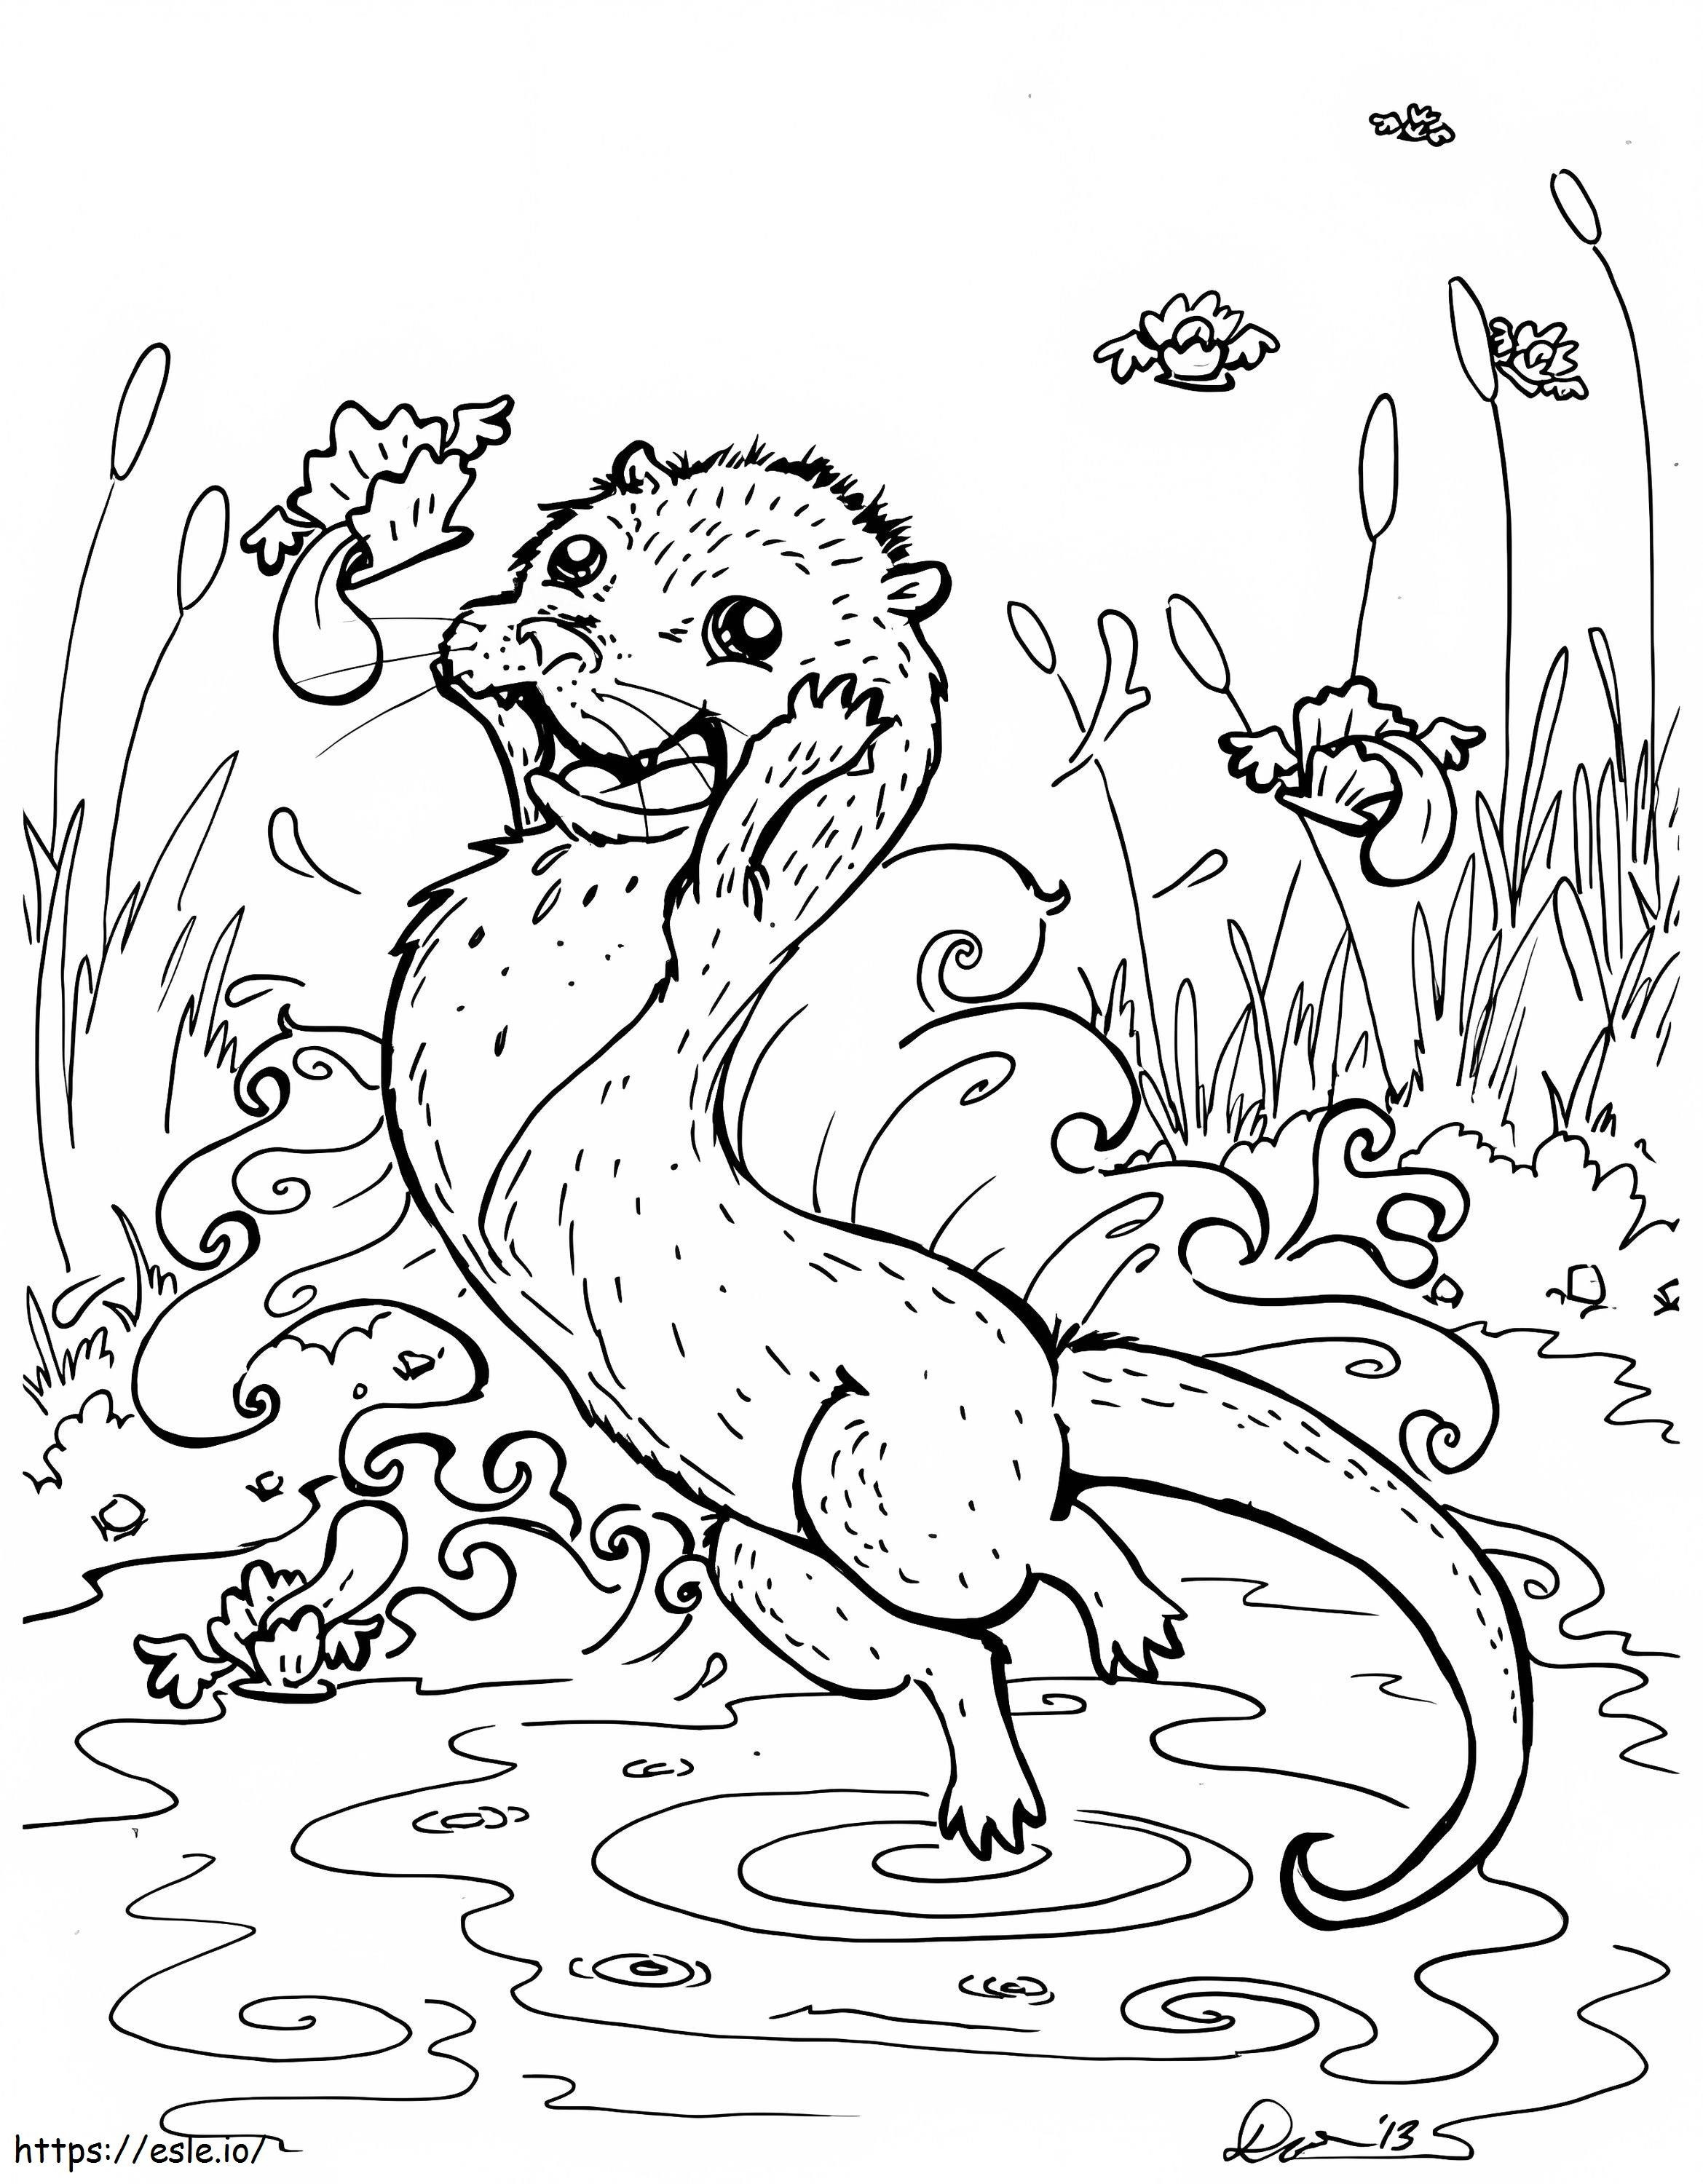 Cute Otter And Sea Animal coloring page